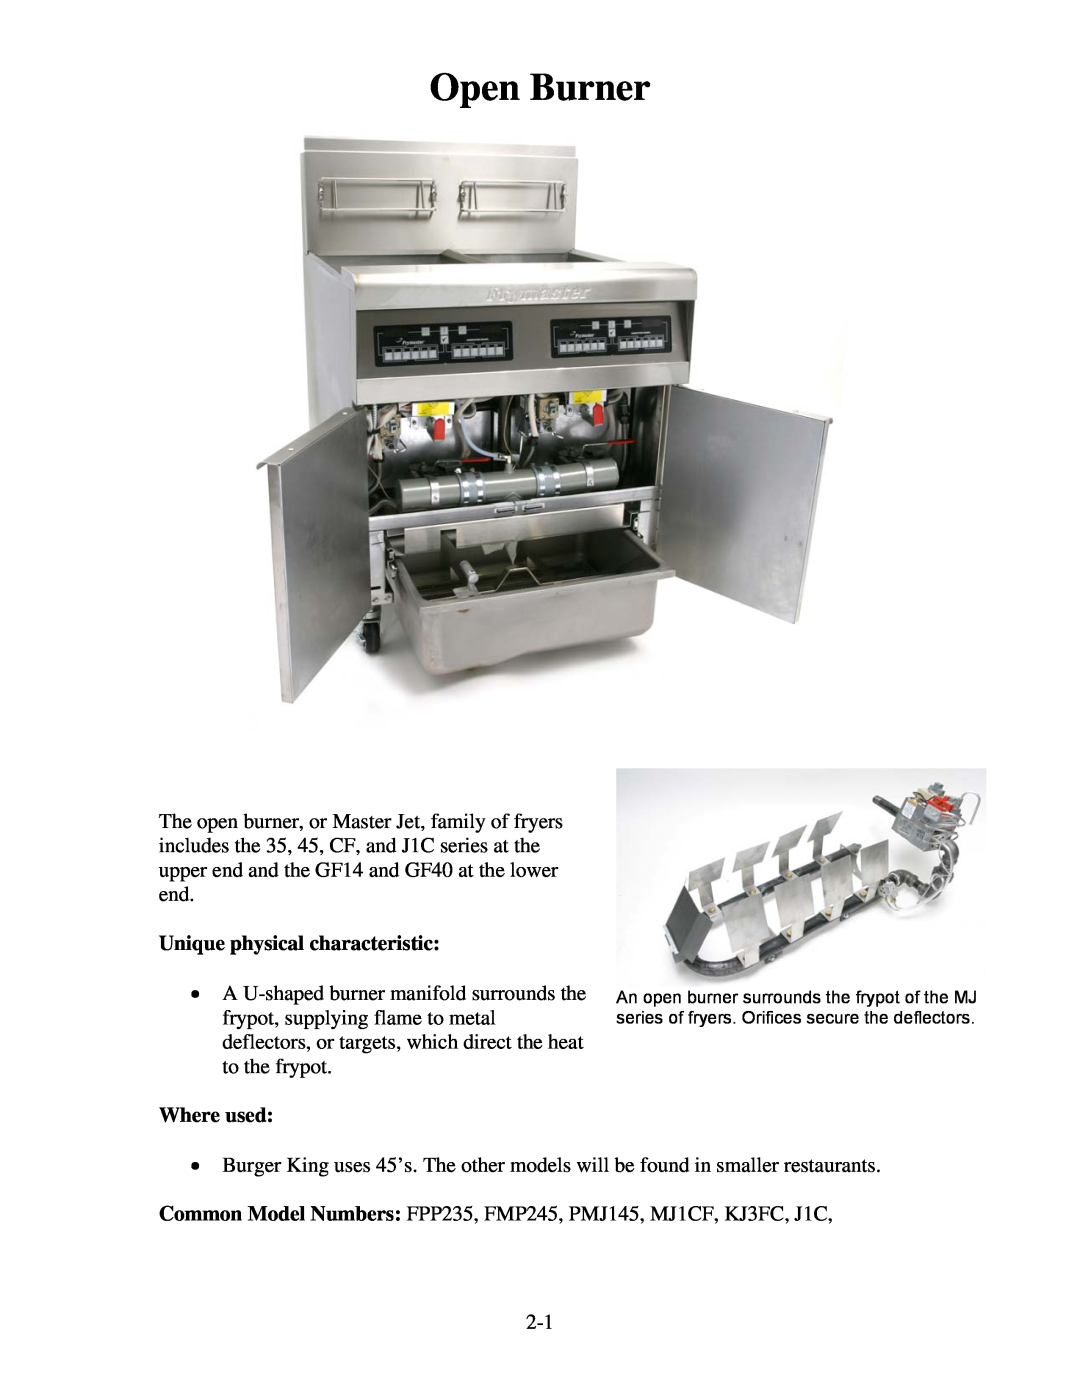 Frymaster H55 manual Open Burner, Where used, Unique physical characteristic 